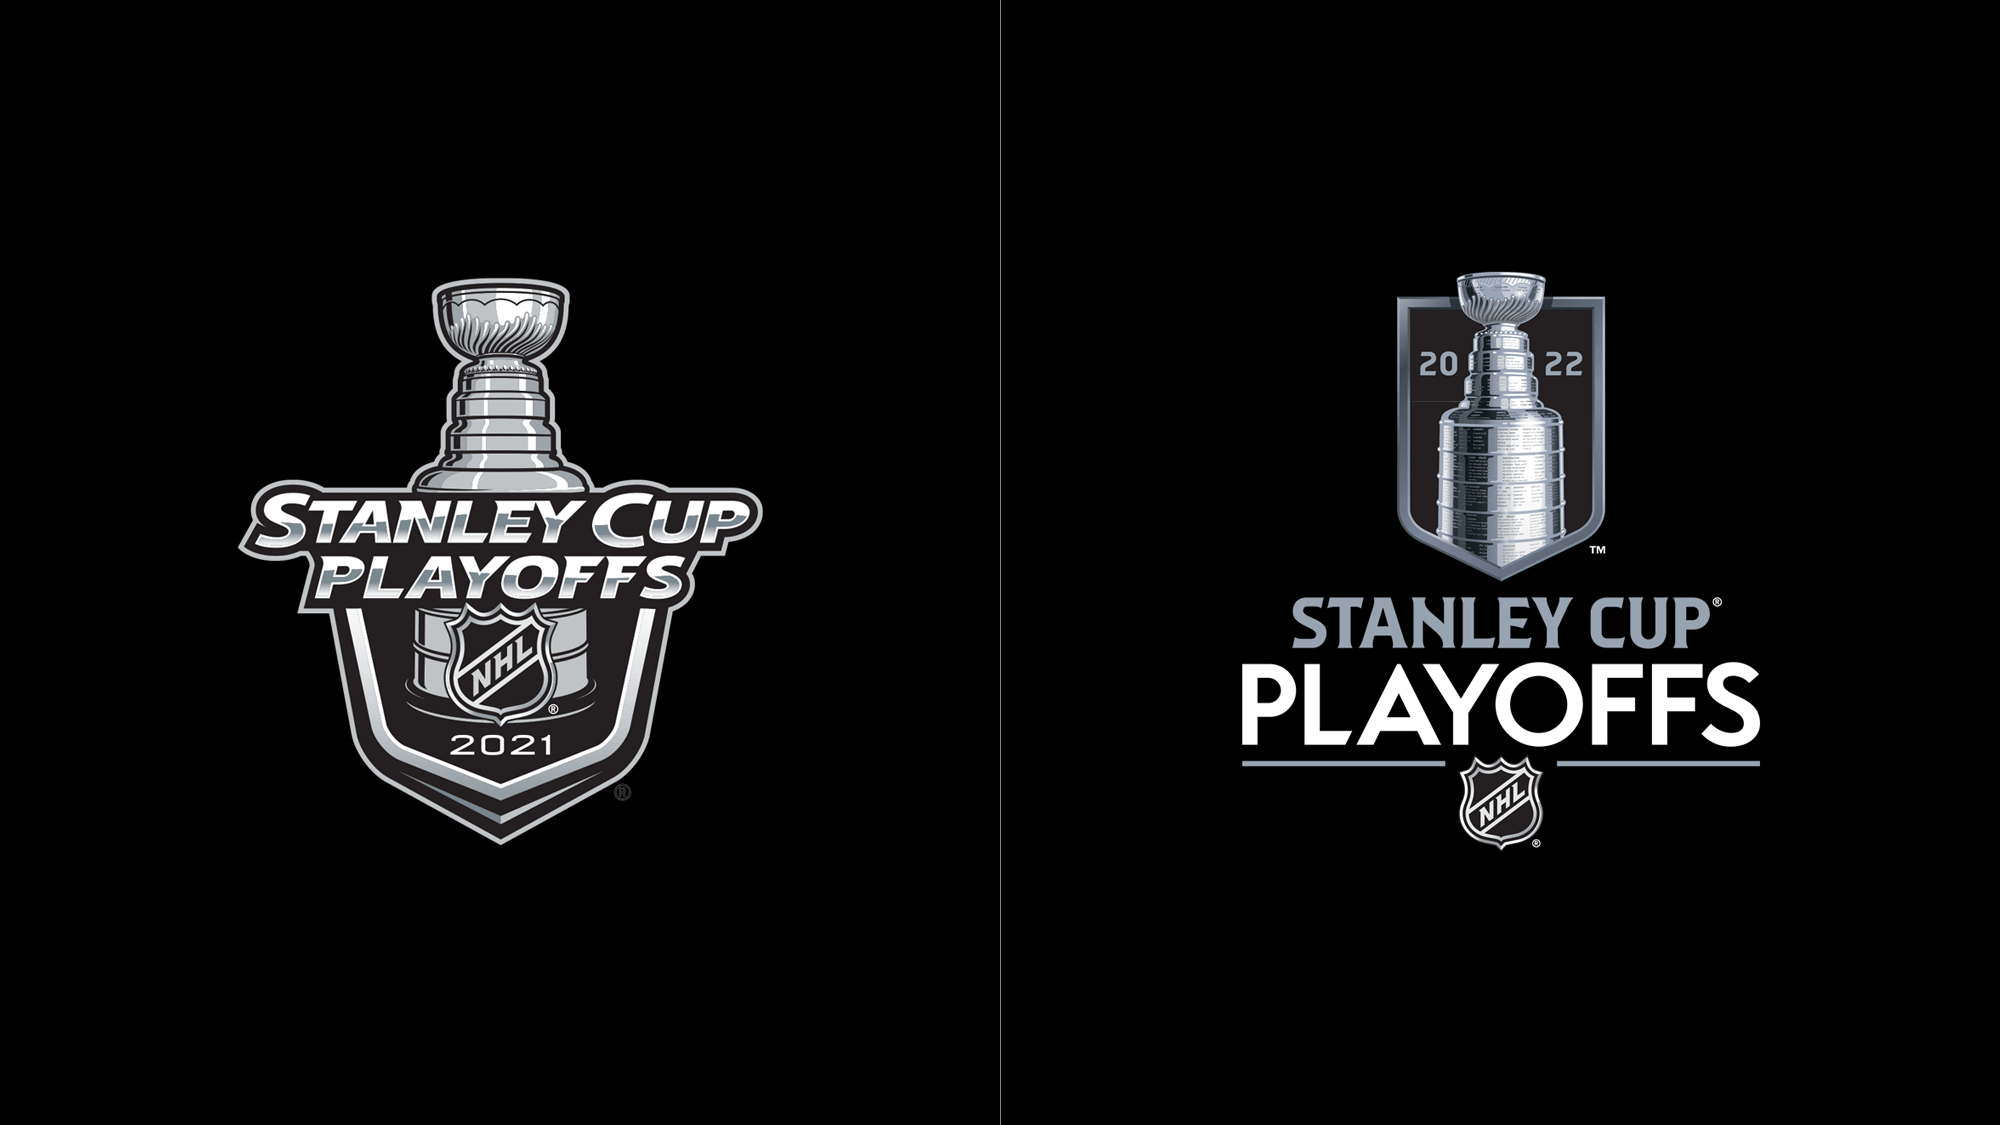 NYSportsJournalism.com - NHL Redesigns Stanley Cup Playoff, Finals Logo -  NHL Reimagines Stanley Cup Playoff Logo For Inaugural TNT, ESPN Coverage